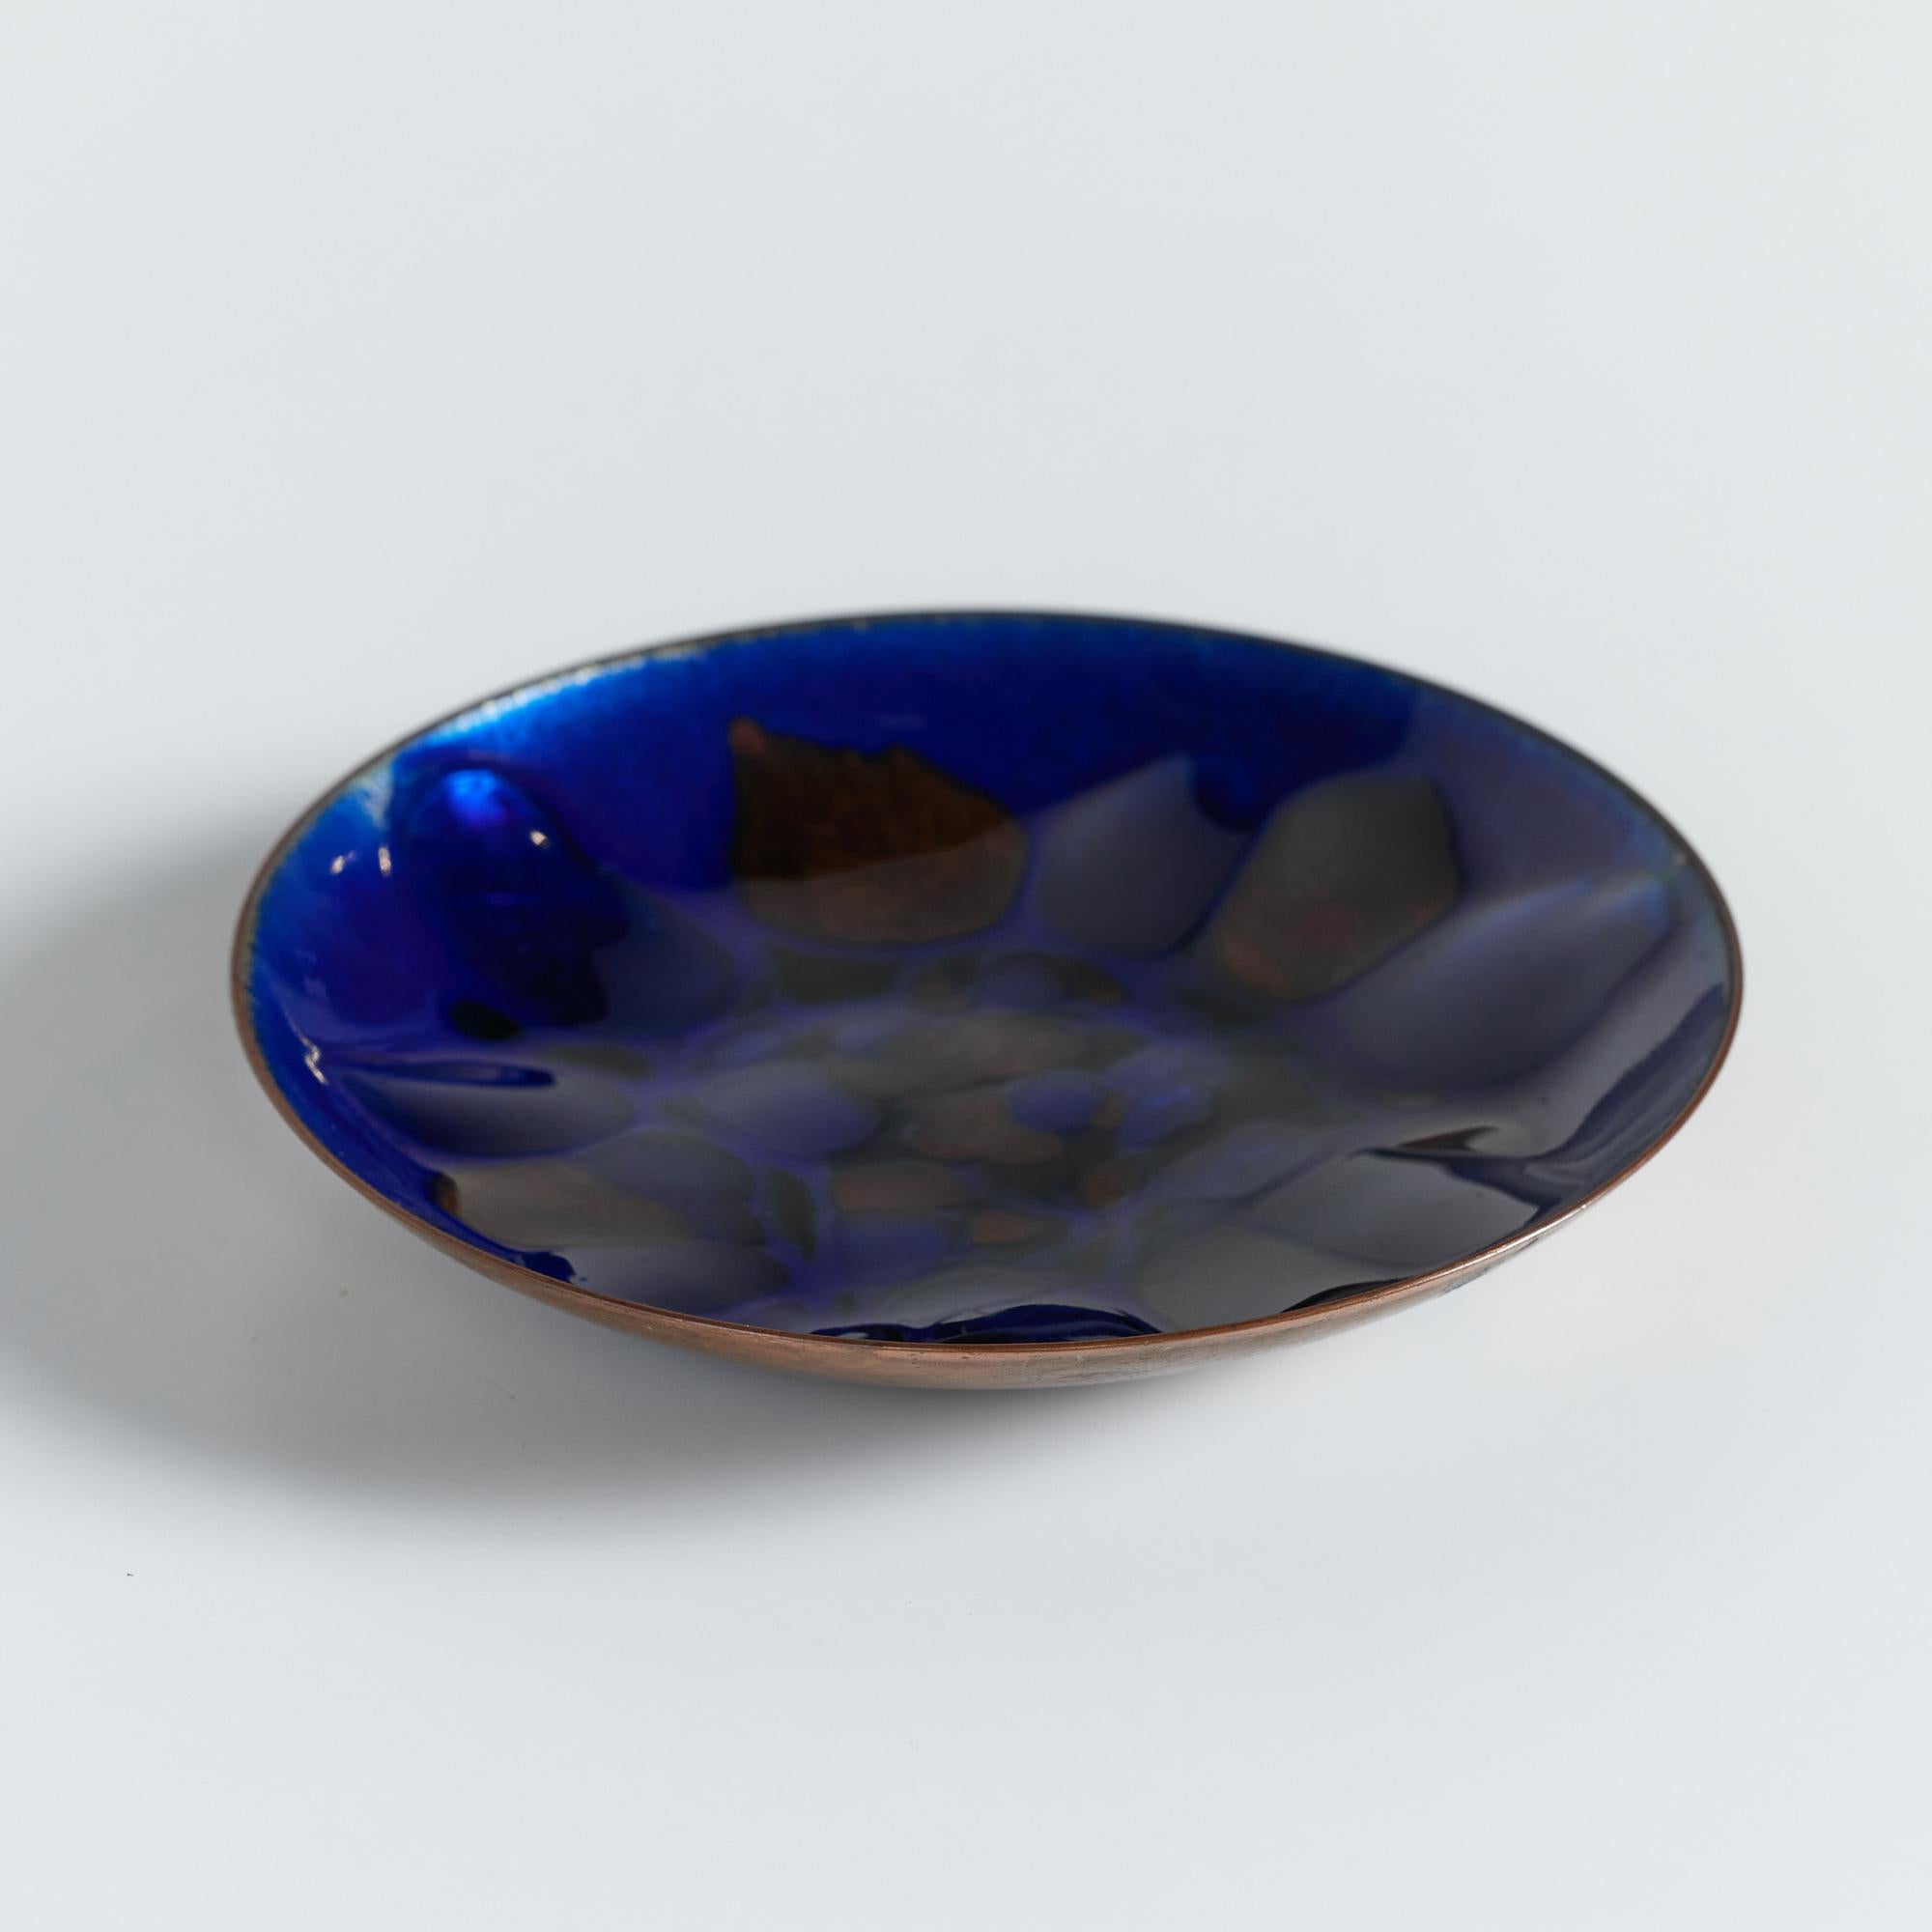 Copper plate by San Francisco artist Win Ng, circa .1960s USA. A beautiful royal blue enameled catchall or simply a décor piece. The dish features a technique that creates an asymmetrical pattern by fusing powdered glass to metal.
Signed Win Ng San